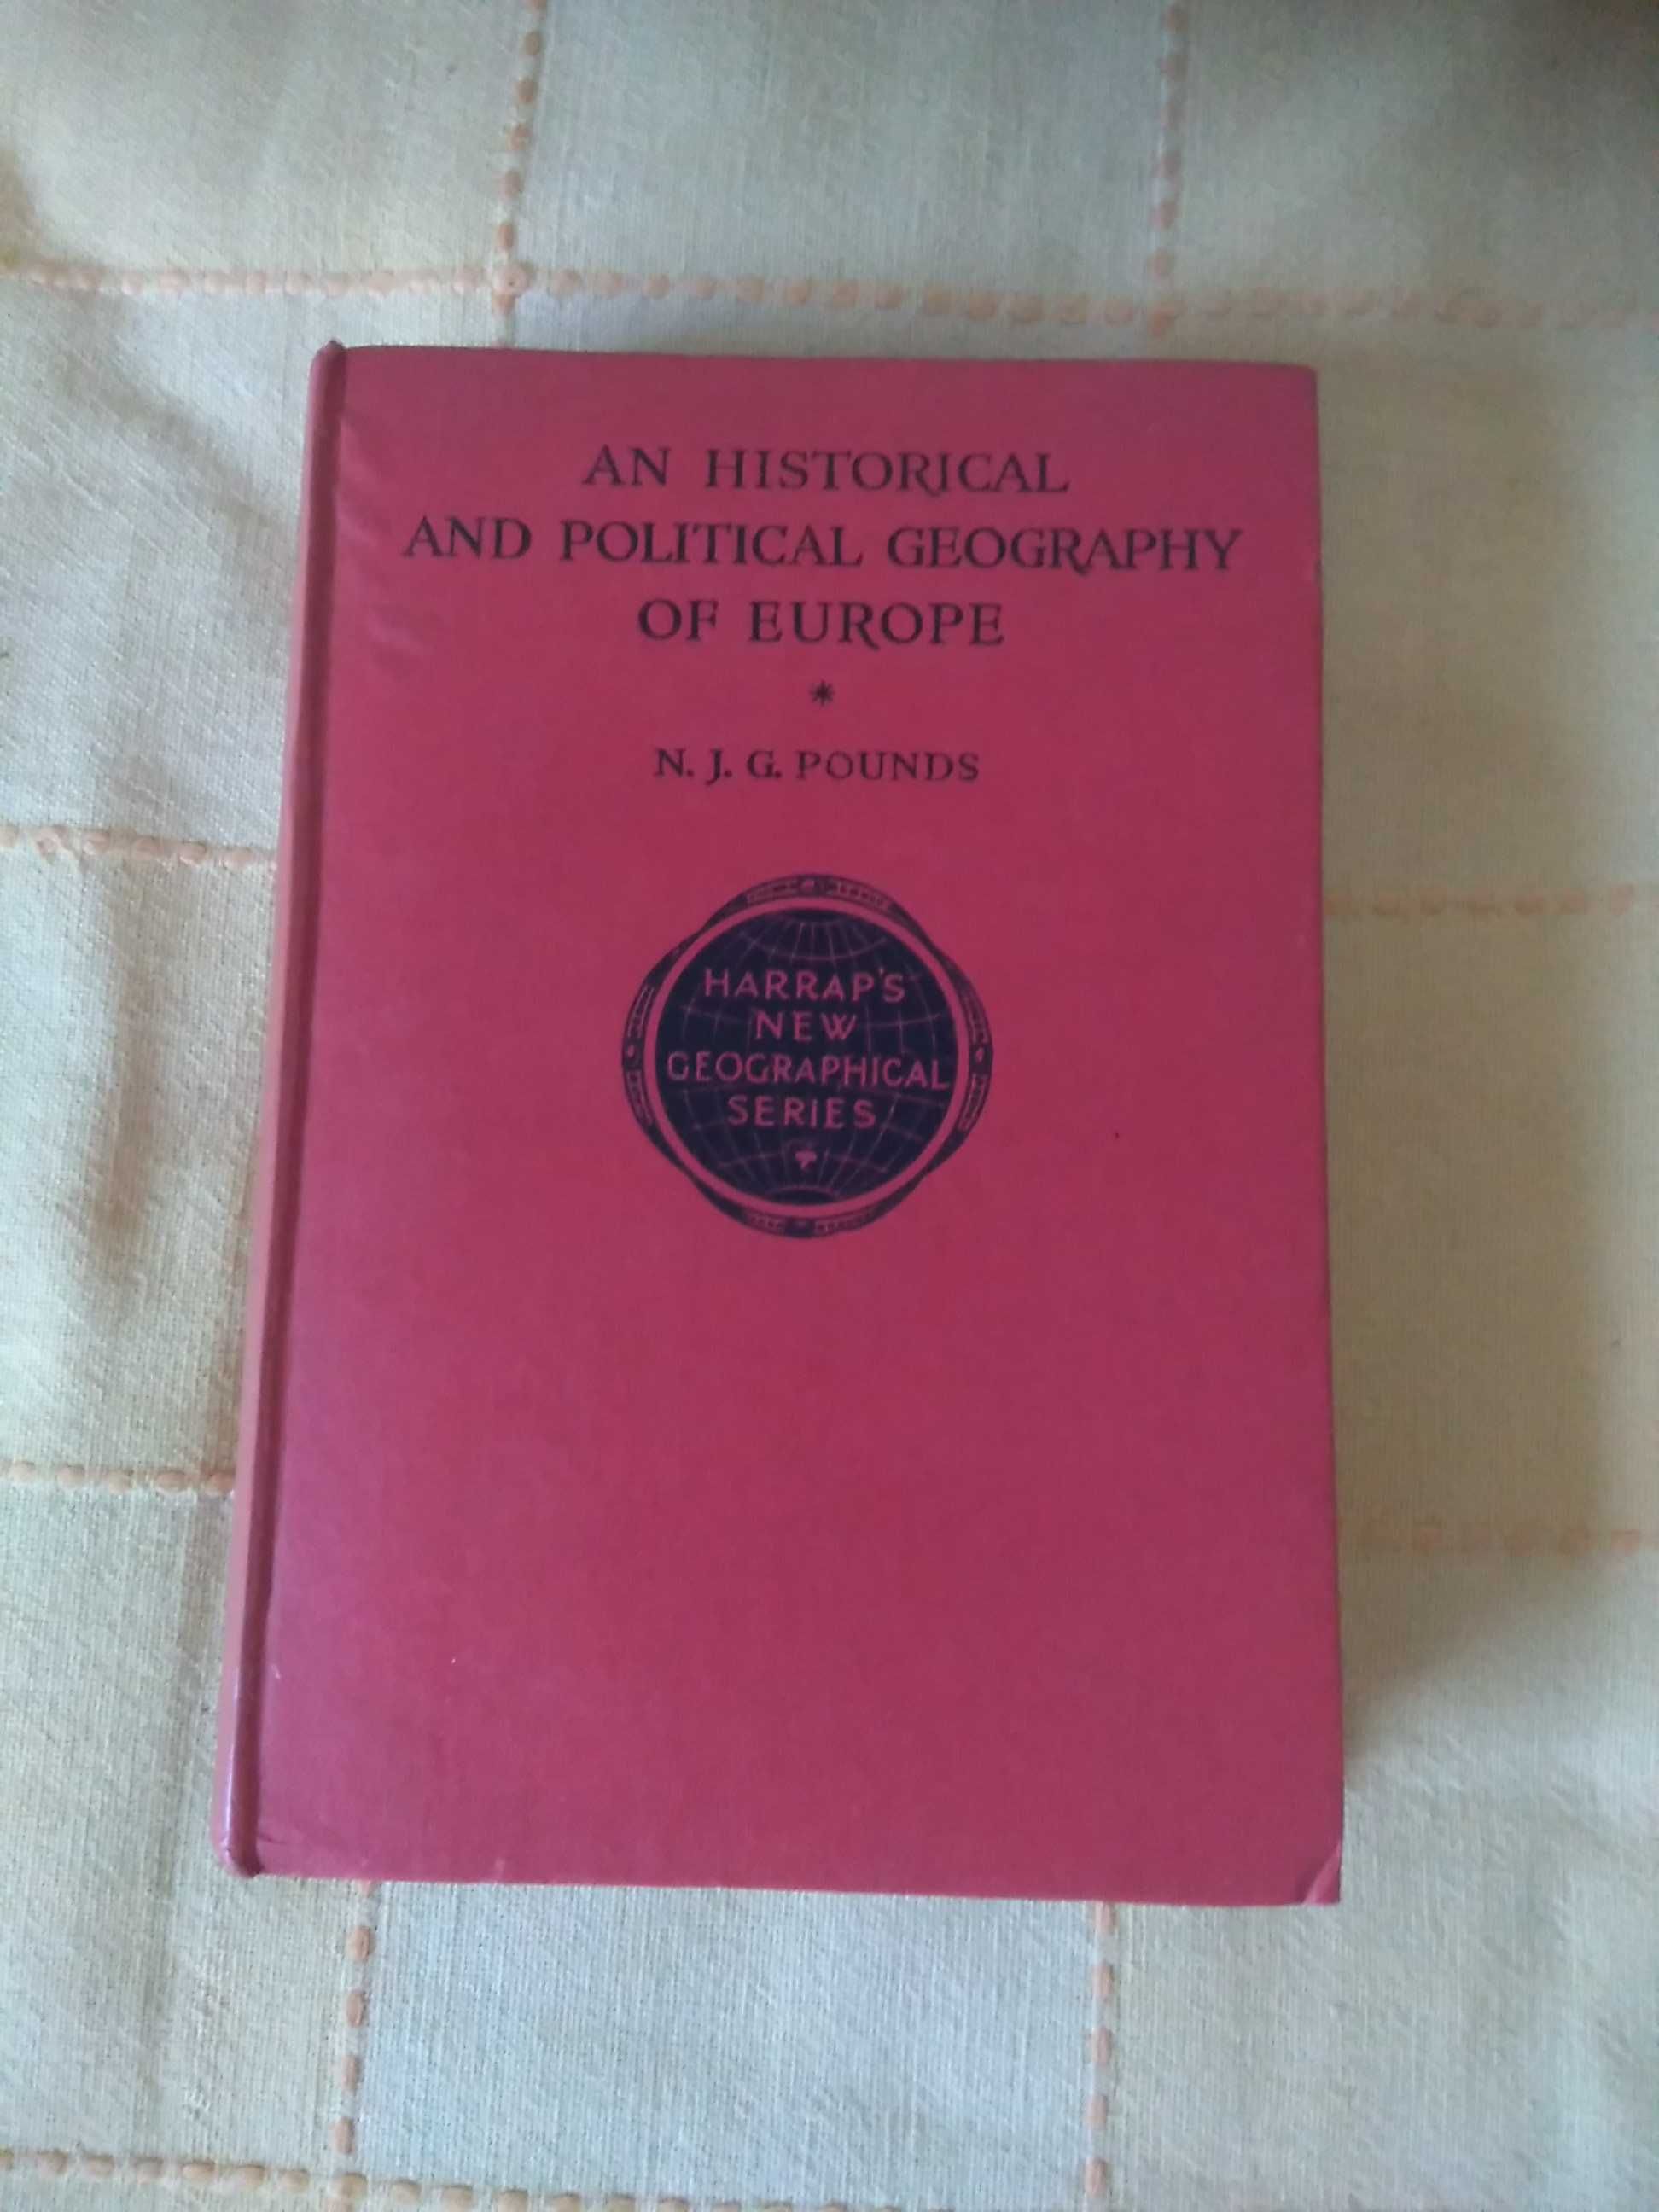 N. J. G. Pounds - An Historical and Political Geography of Europe